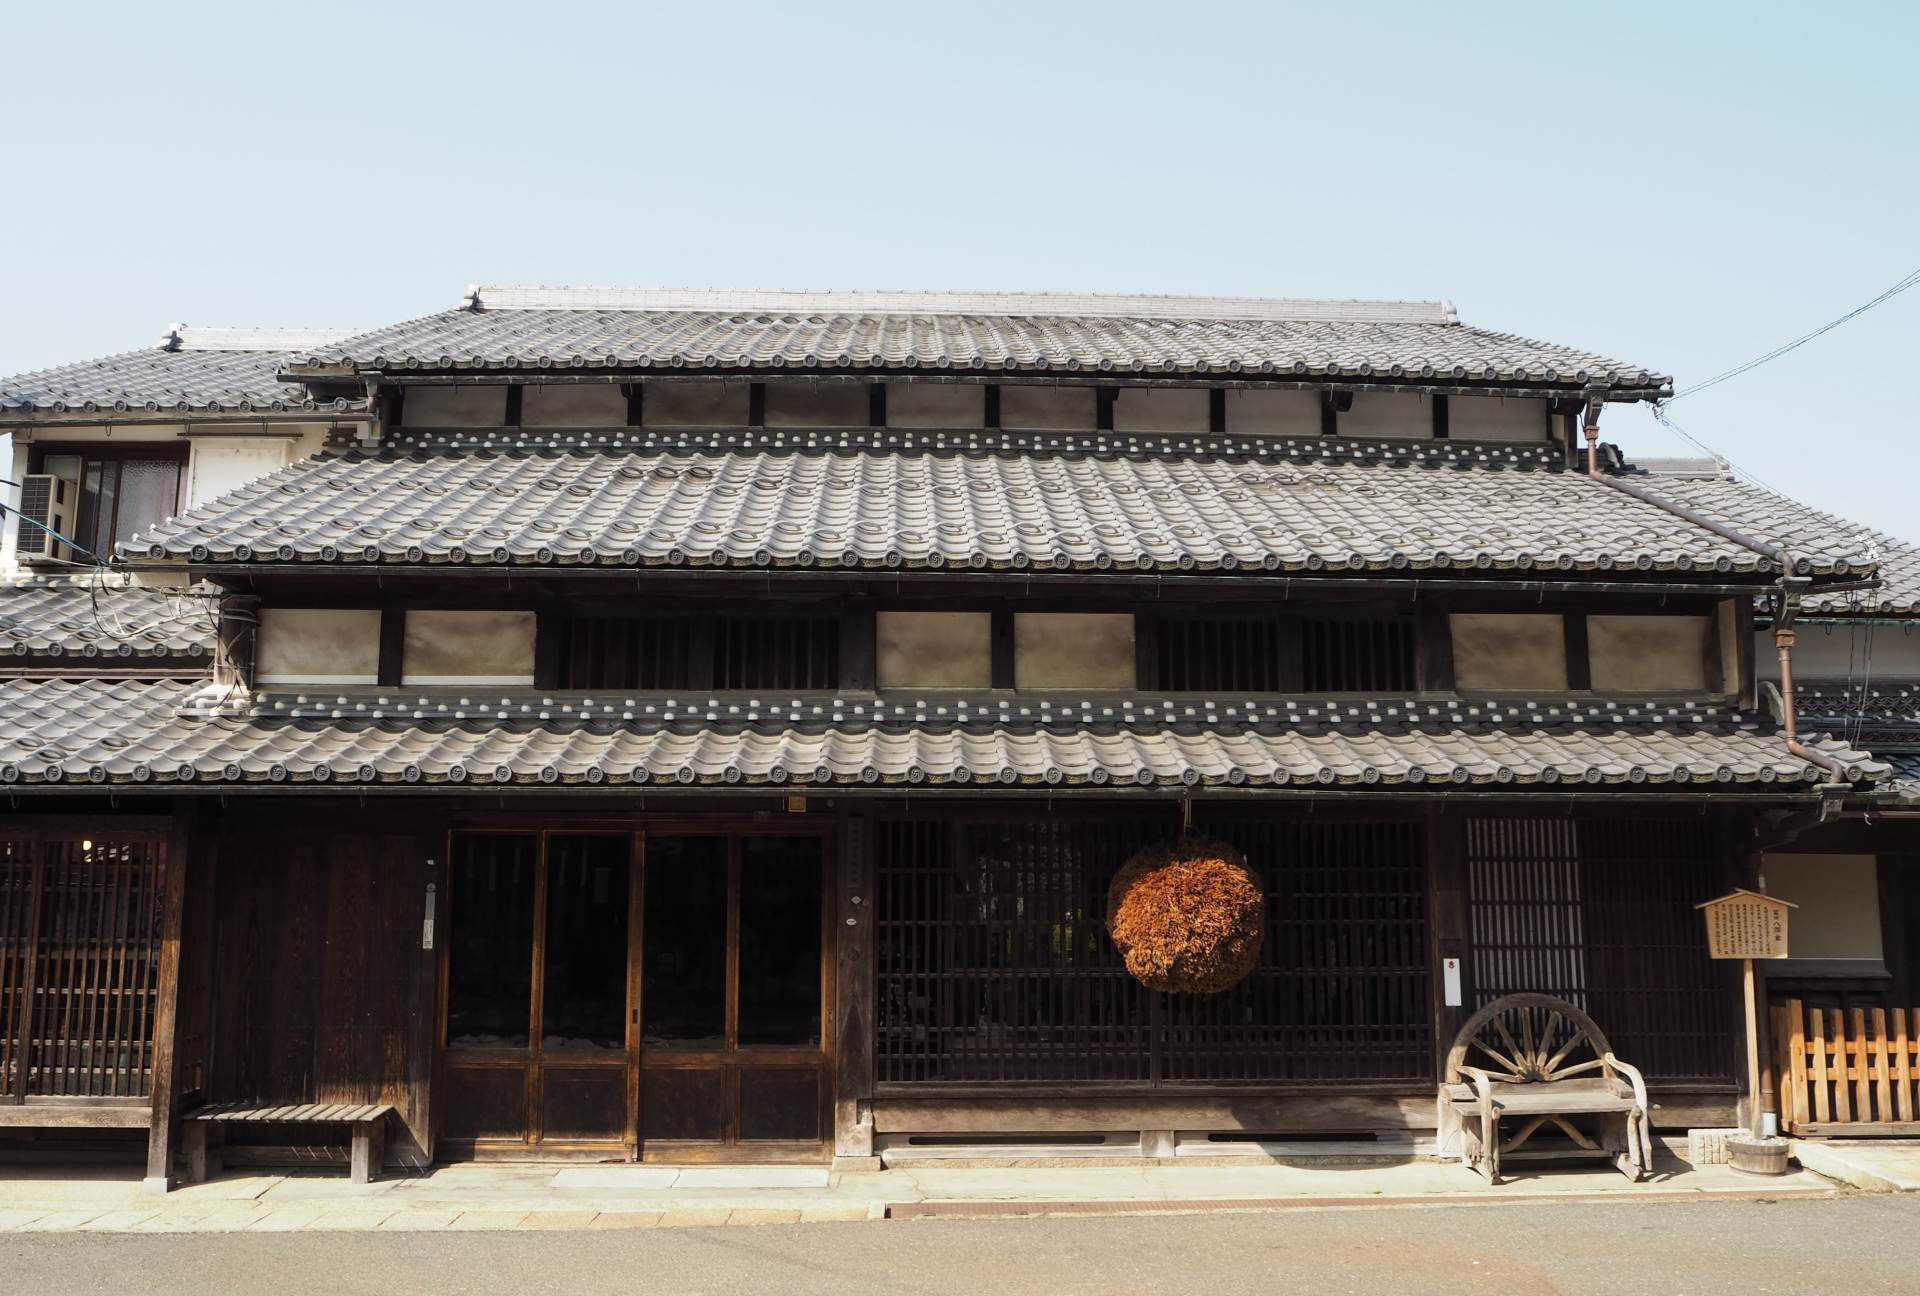 The brewery’s main building was built in the Edo period and remains today as a registered tangible cultural property in Japan.